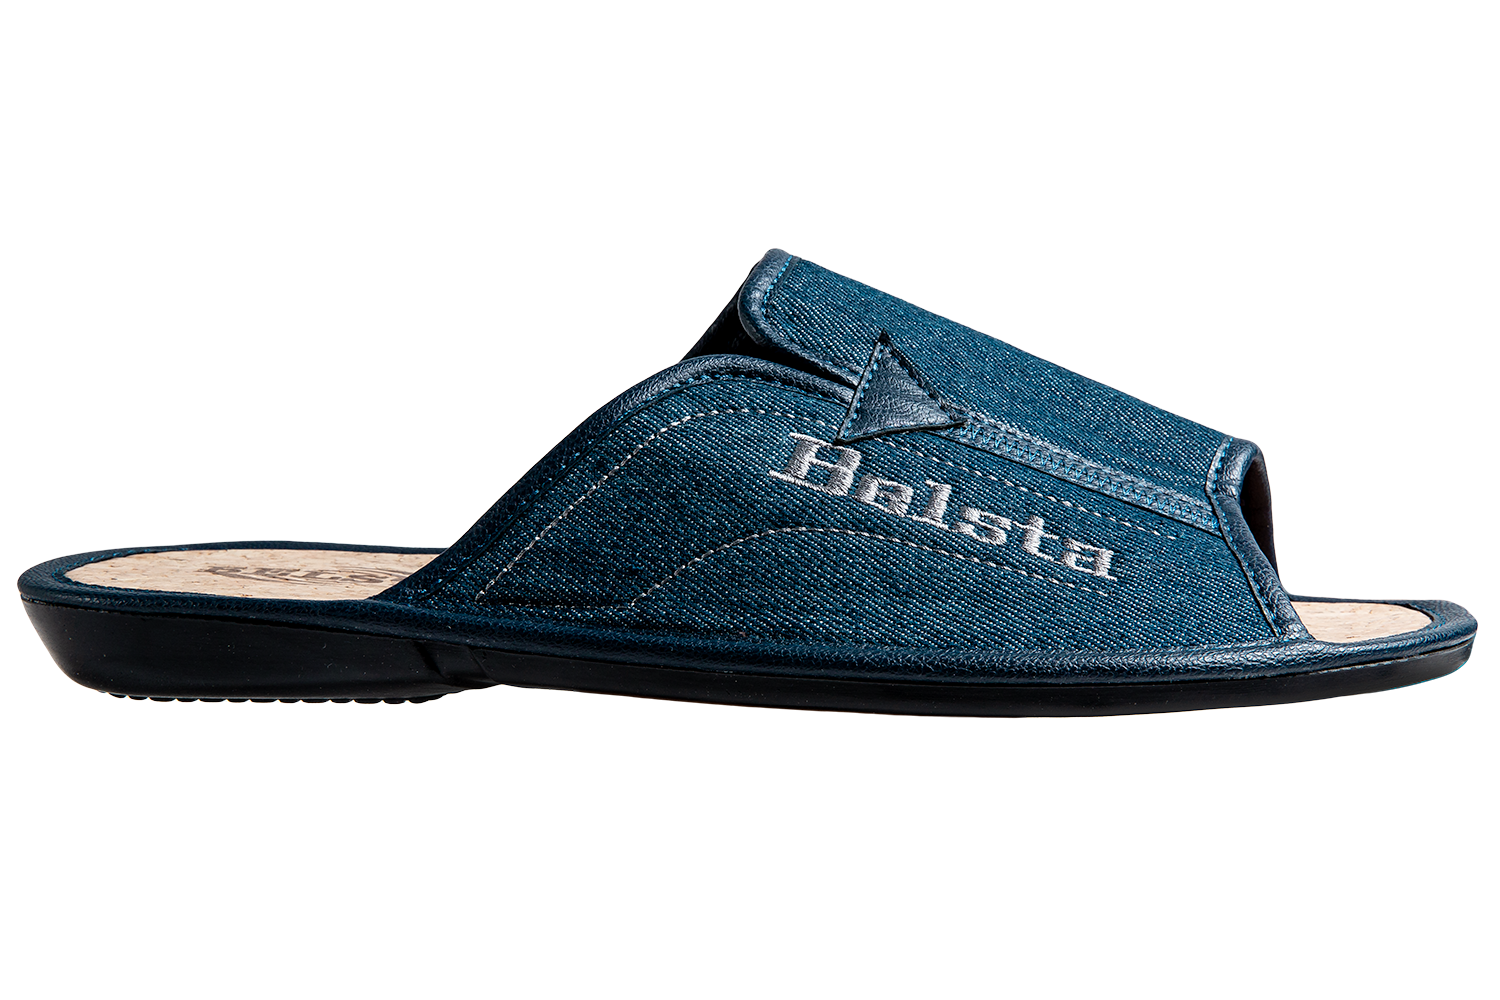 Men's open slippers BELSTA in denim and eco leather inserts - 3